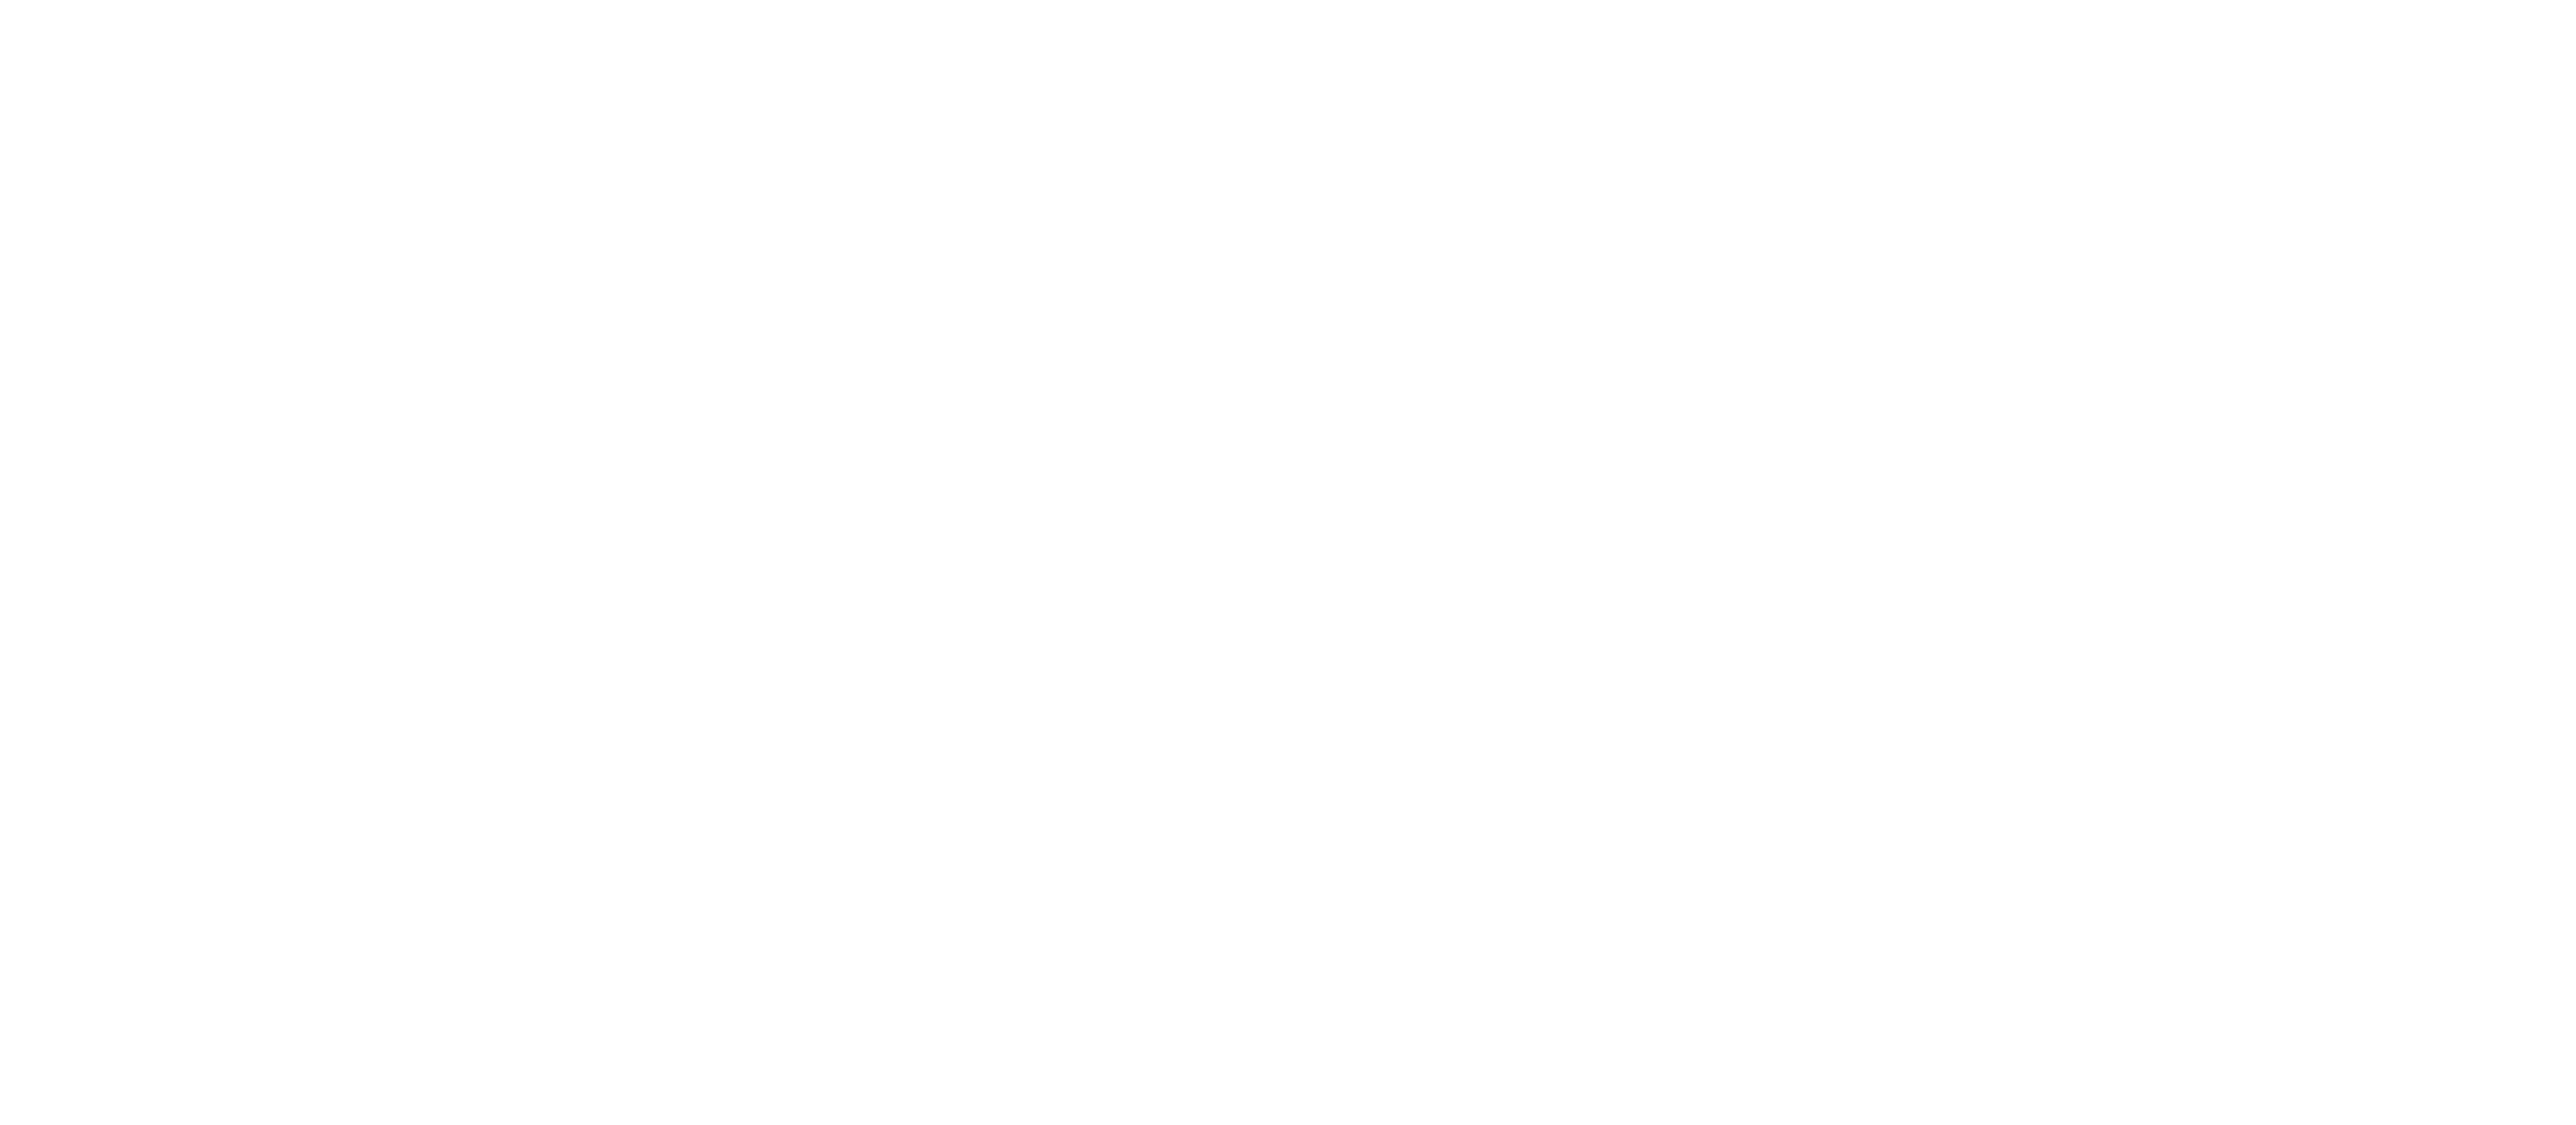 Cats to Jags